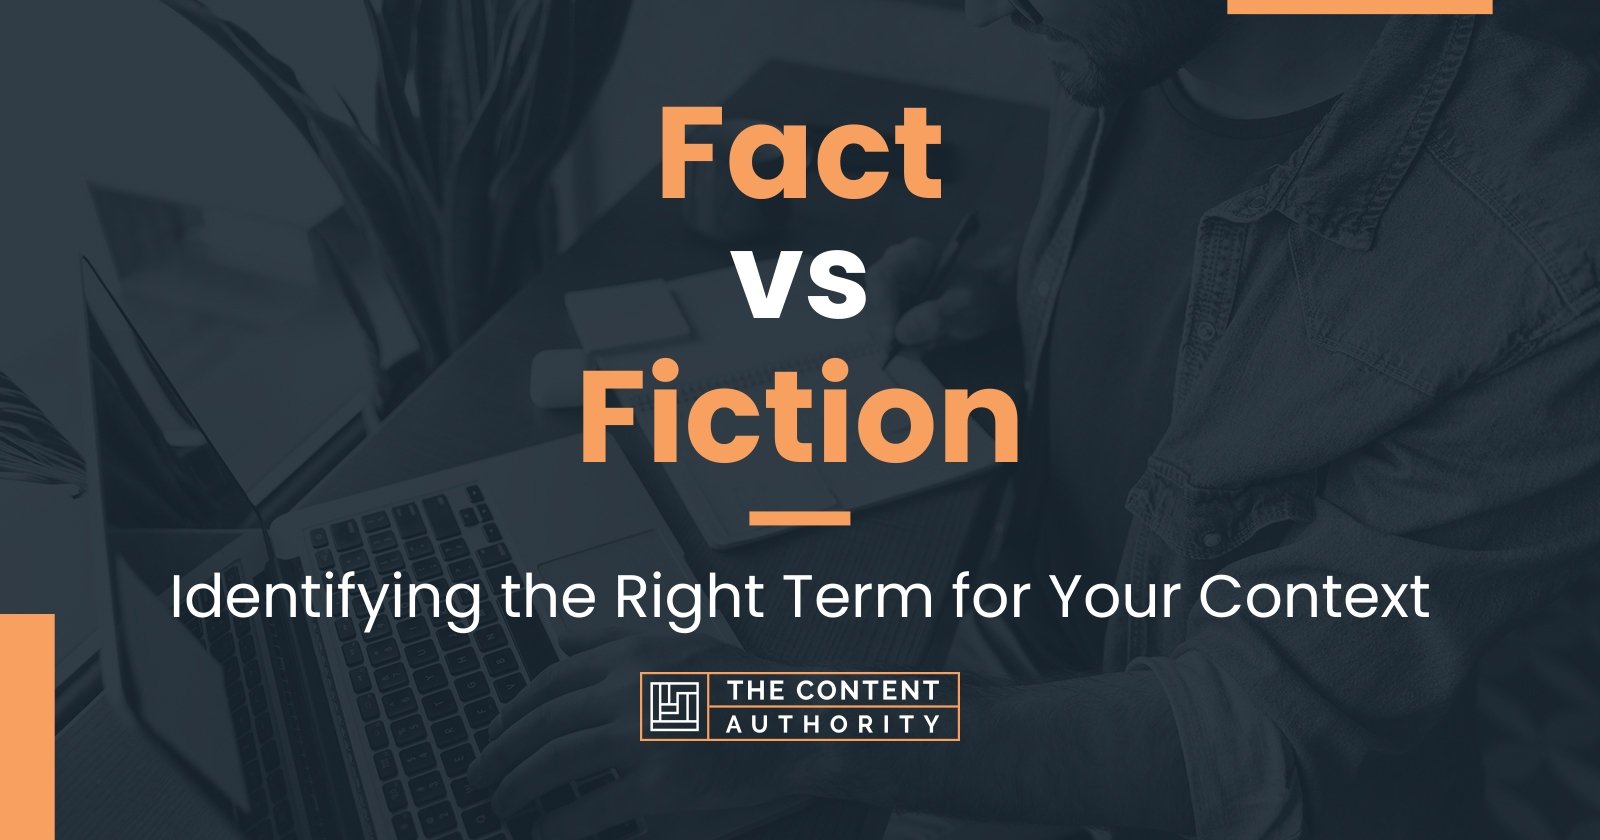 Fact vs Fiction: Identifying the Right Term for Your Context